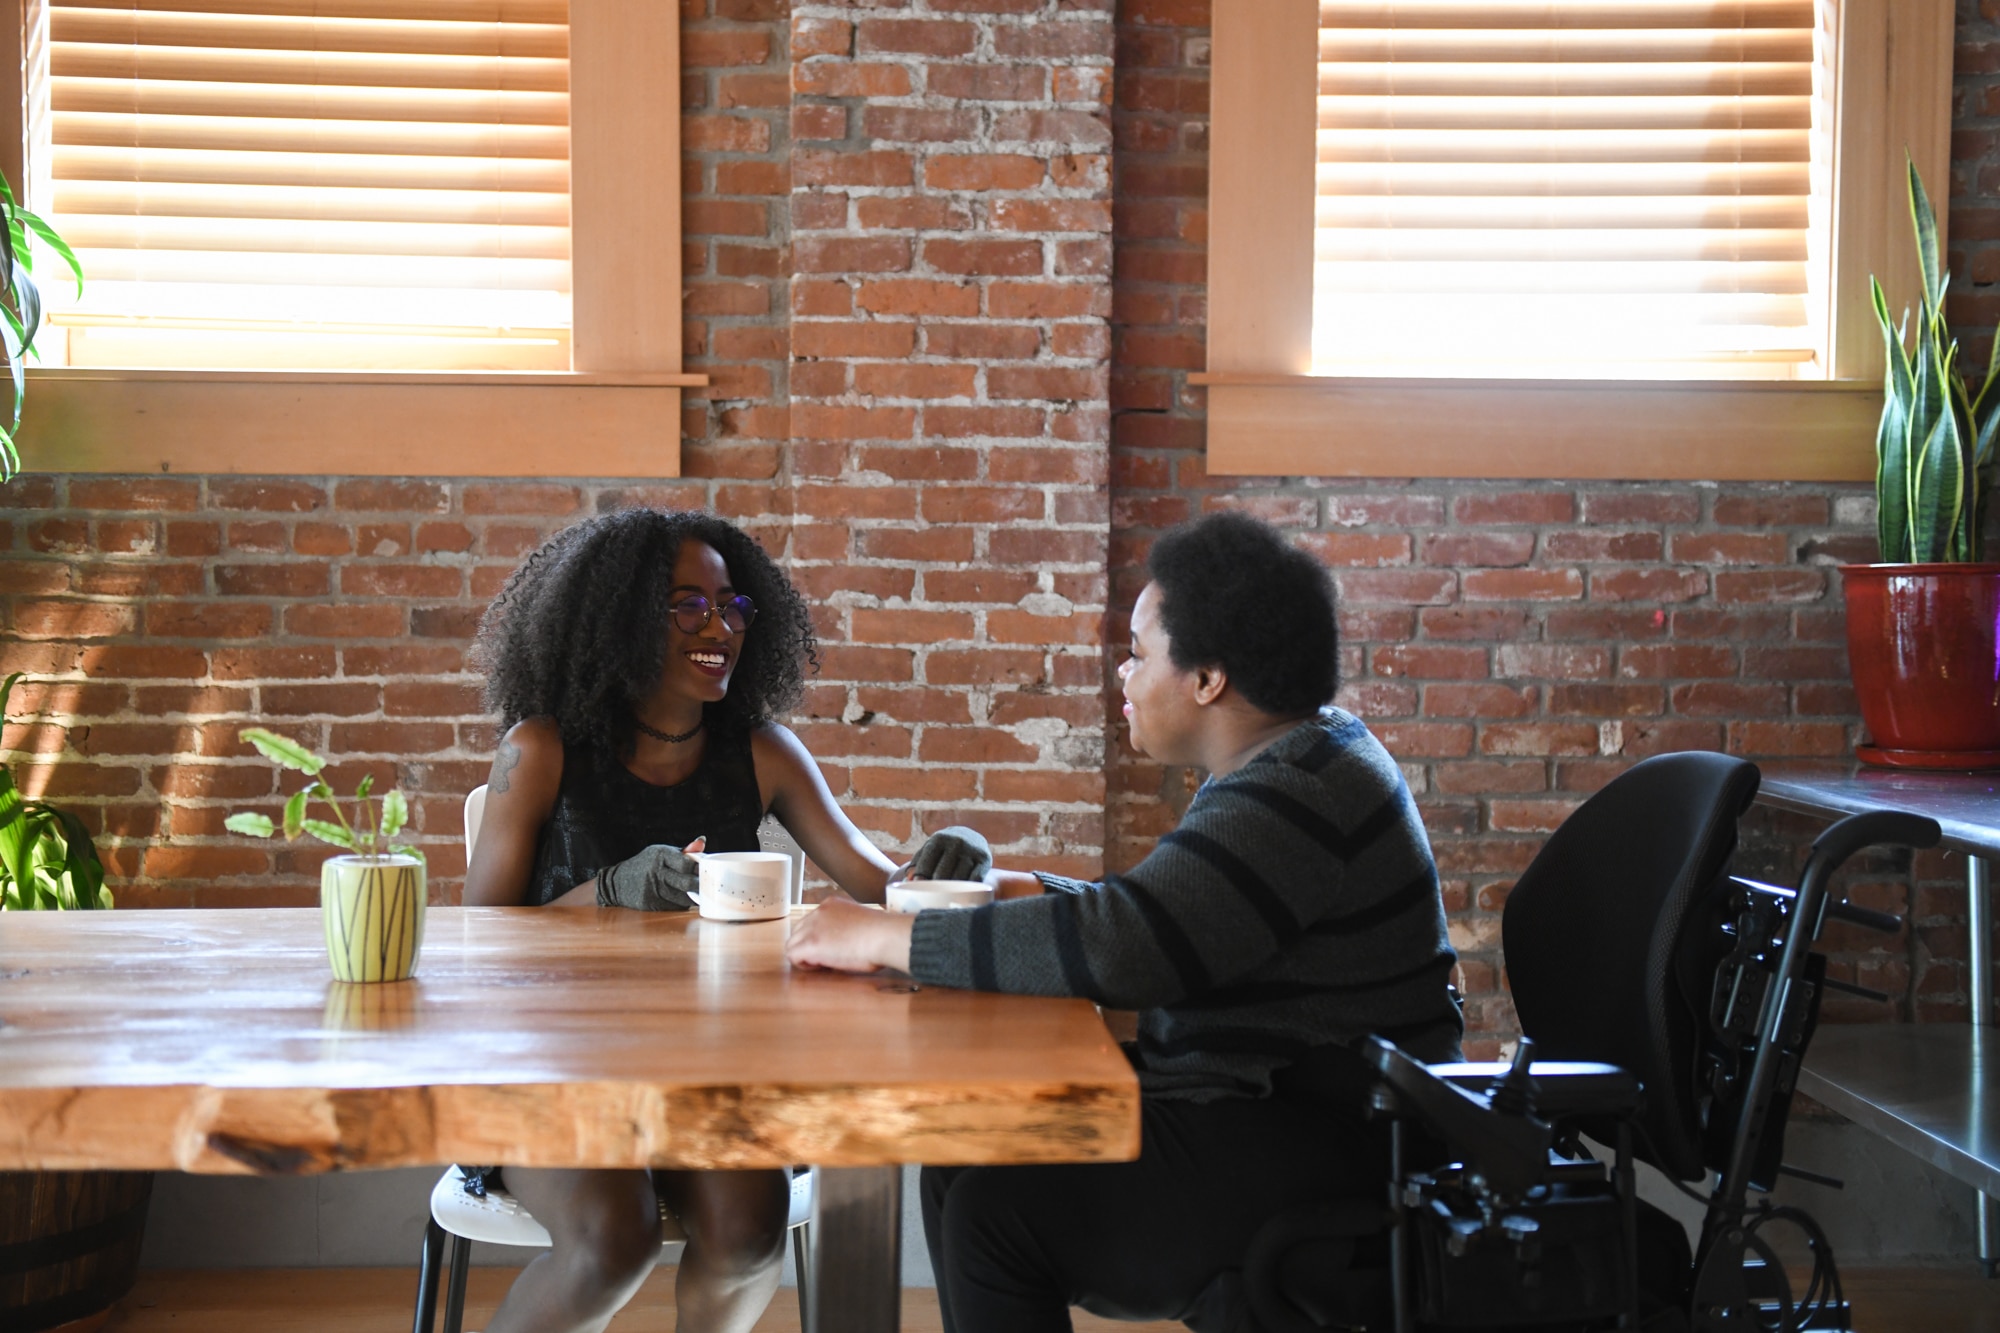 Two disabled Black people (a femme wearing compression gloves, and a non-binary person in a power wheelchair) smile and sit across each other while on a coffee date in a brick building.